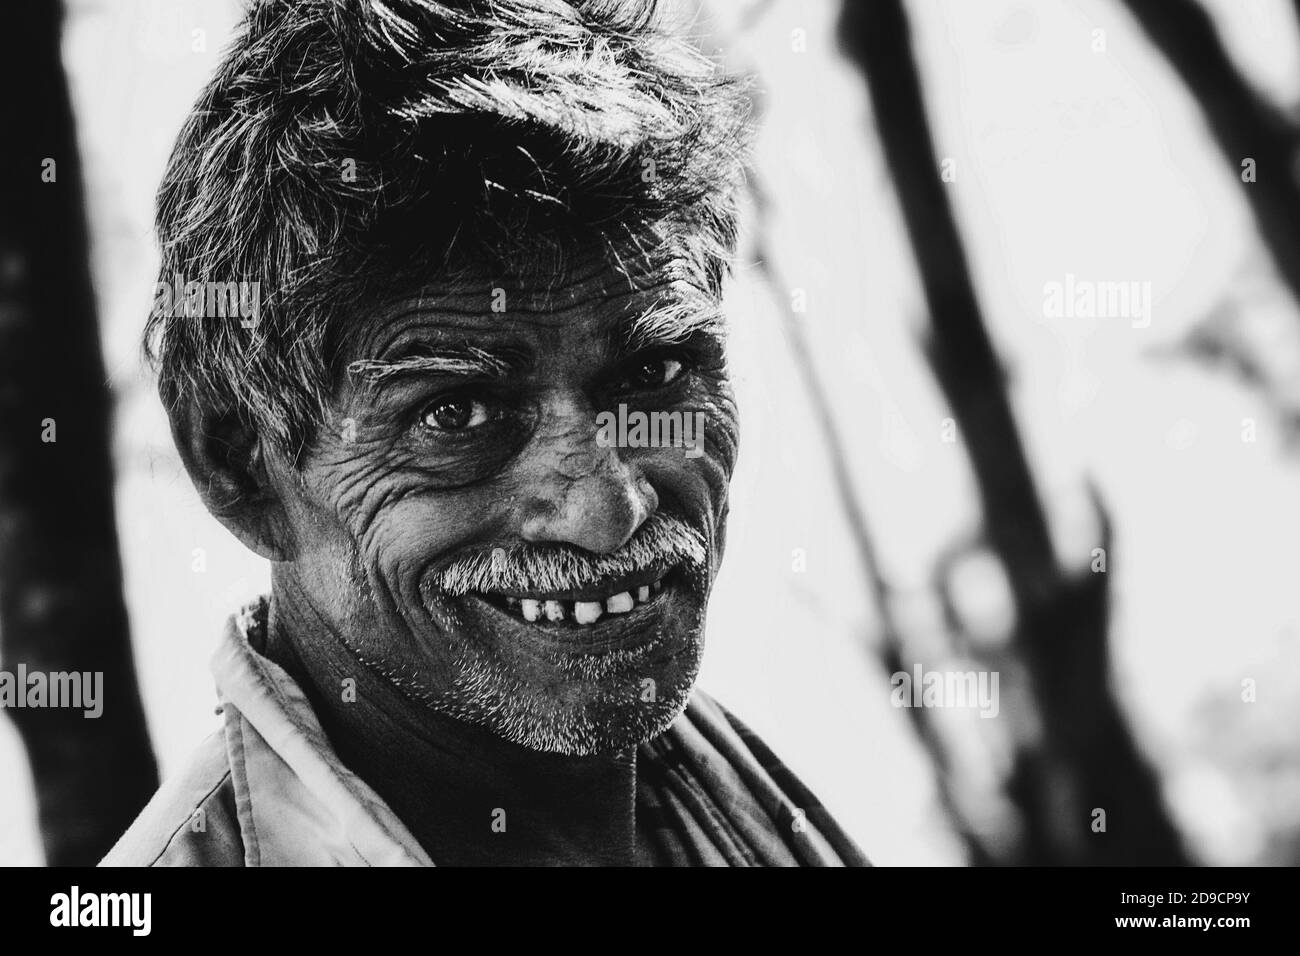 Lifestyle photos of homeless people in Bangladesh Stock Photo